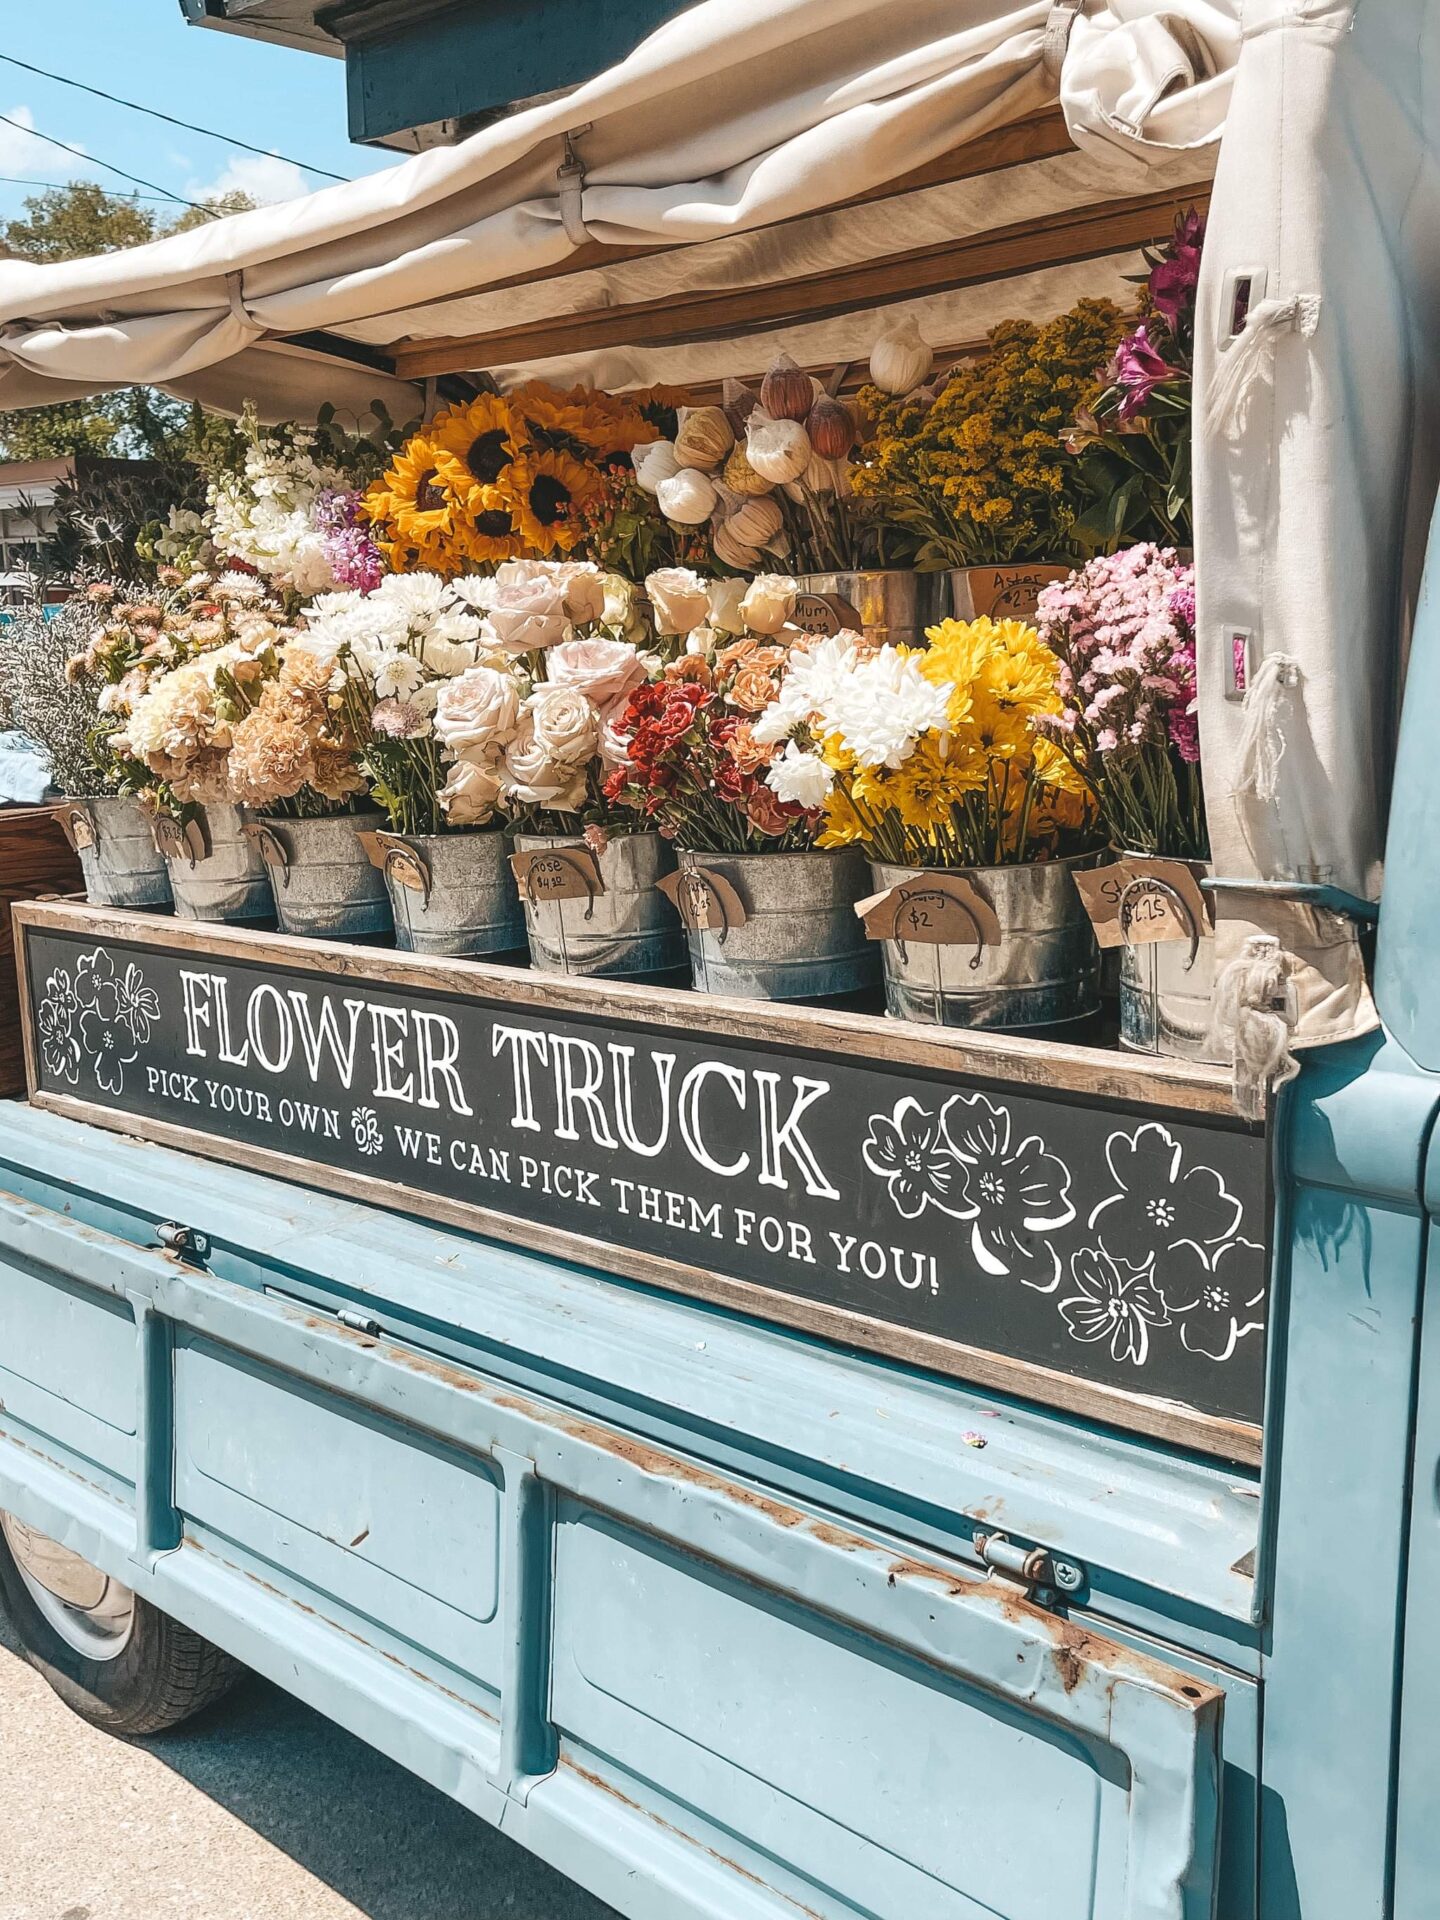 Top 10 Cheap Or Free Things To Do In Nashville, Tennessee - flower truck at the 12 South Neighborhood